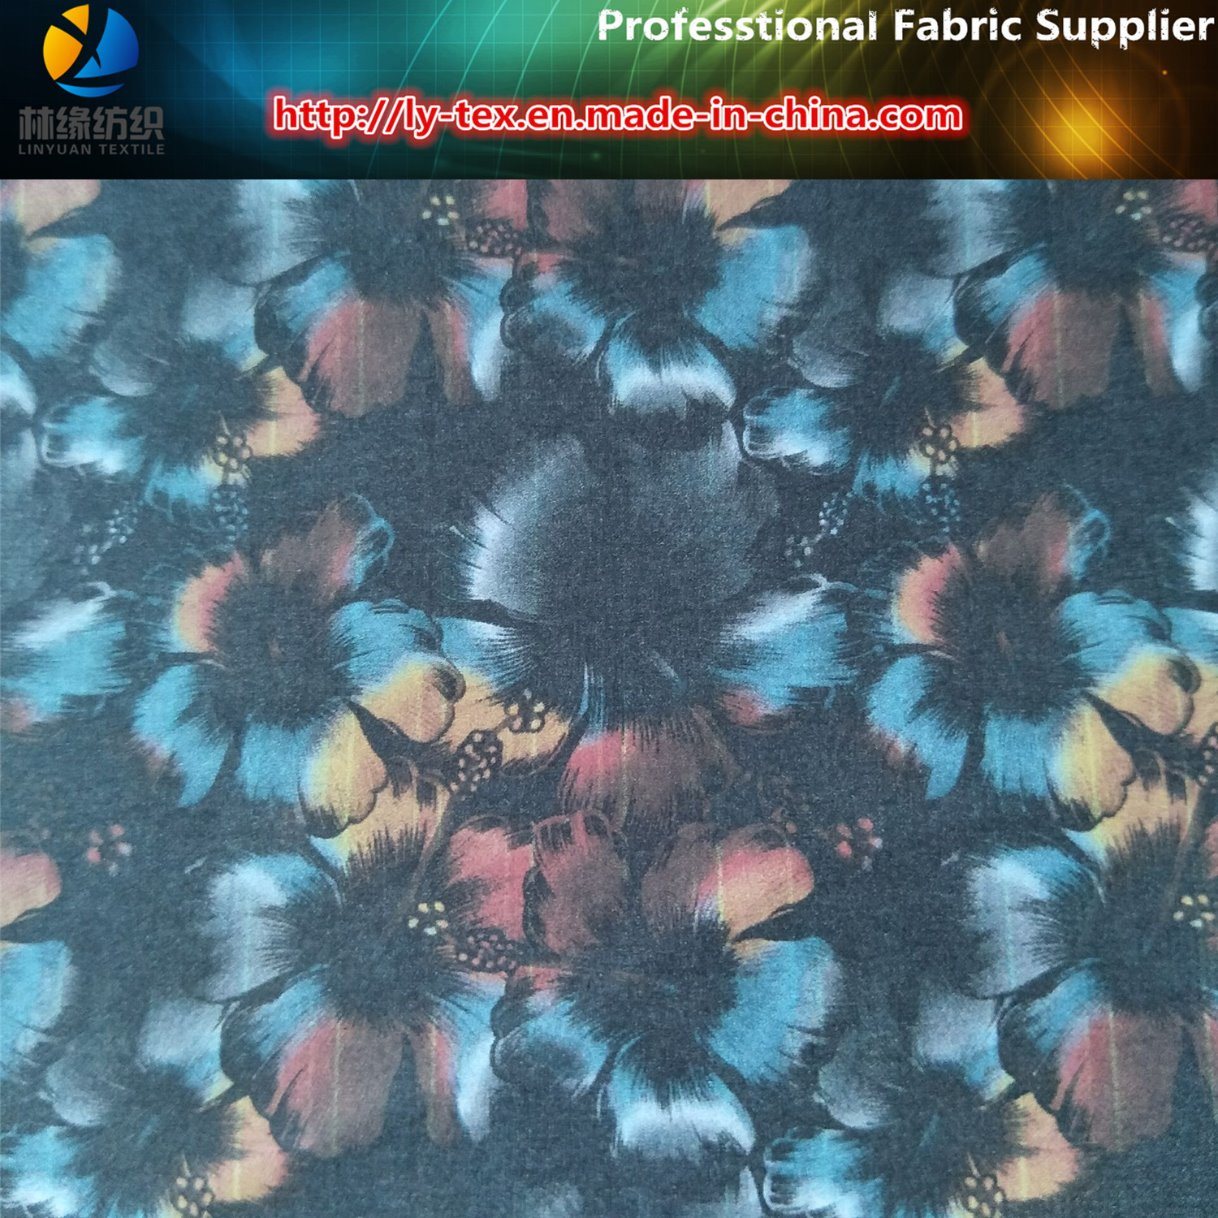 2017 Newest Digital Printing of Flower in The Polyester Fabric